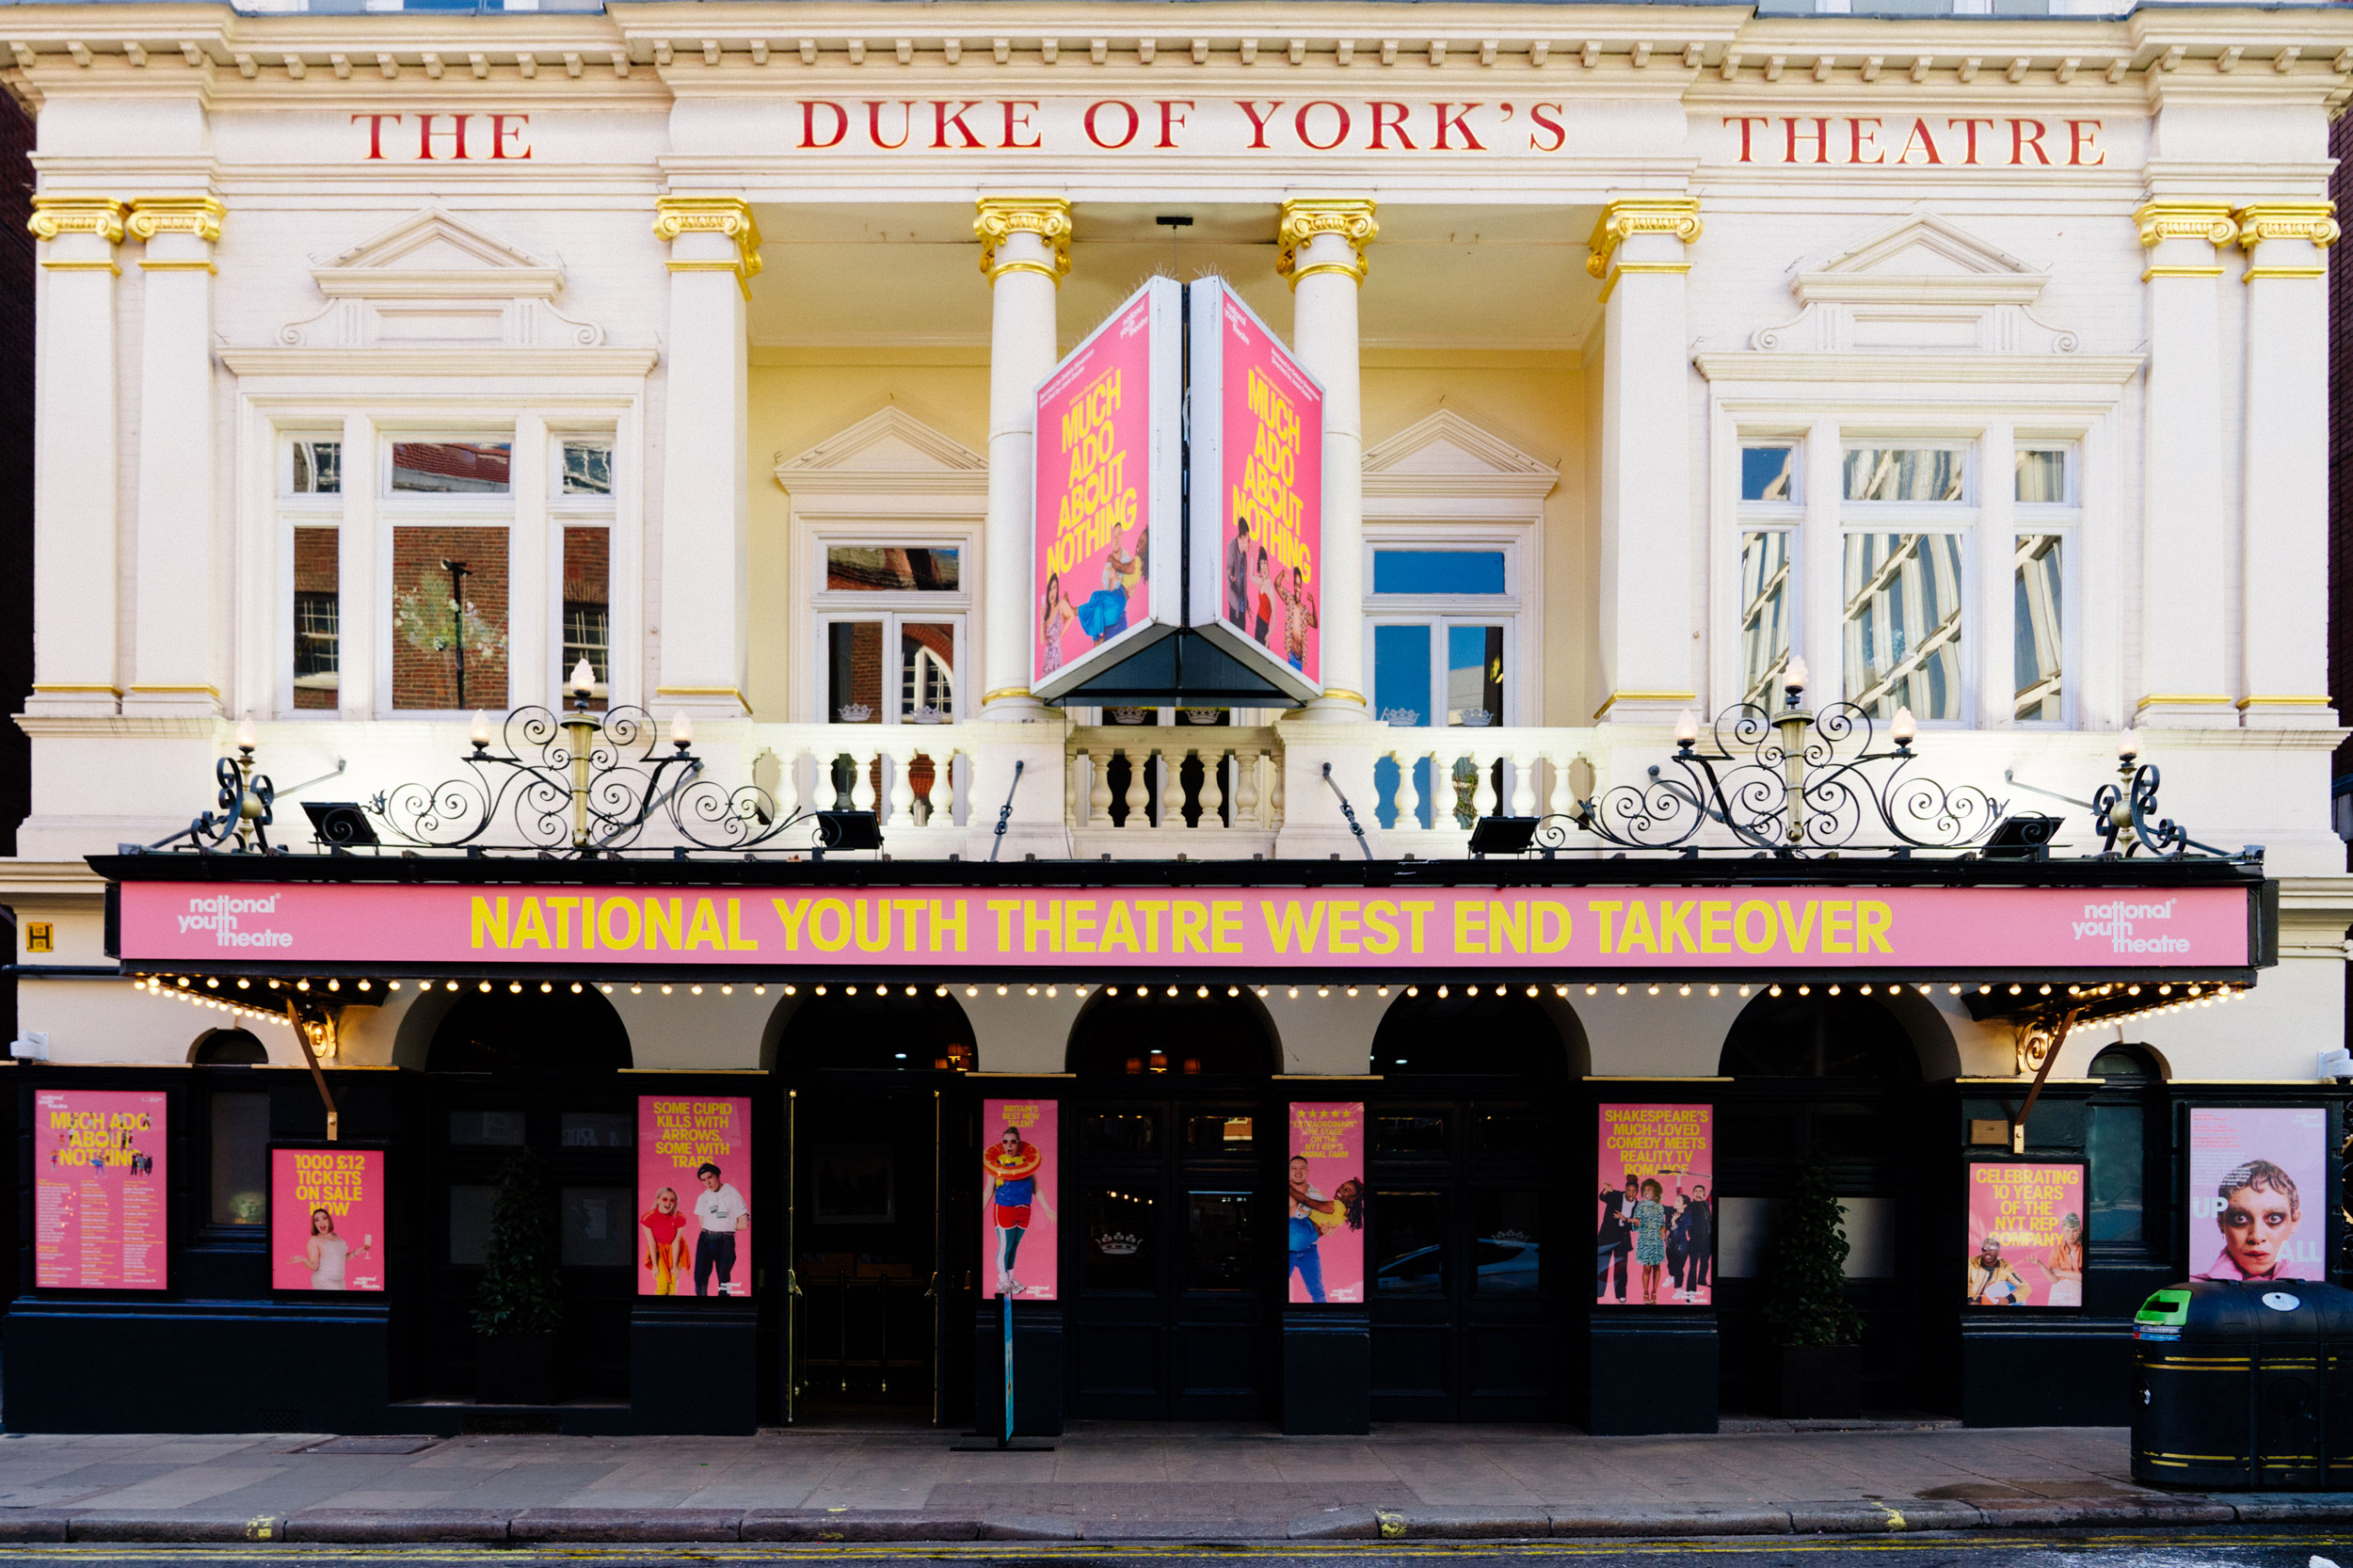 Duke-of-Yorks-Theatre_NYT-2023_Perspective-edit